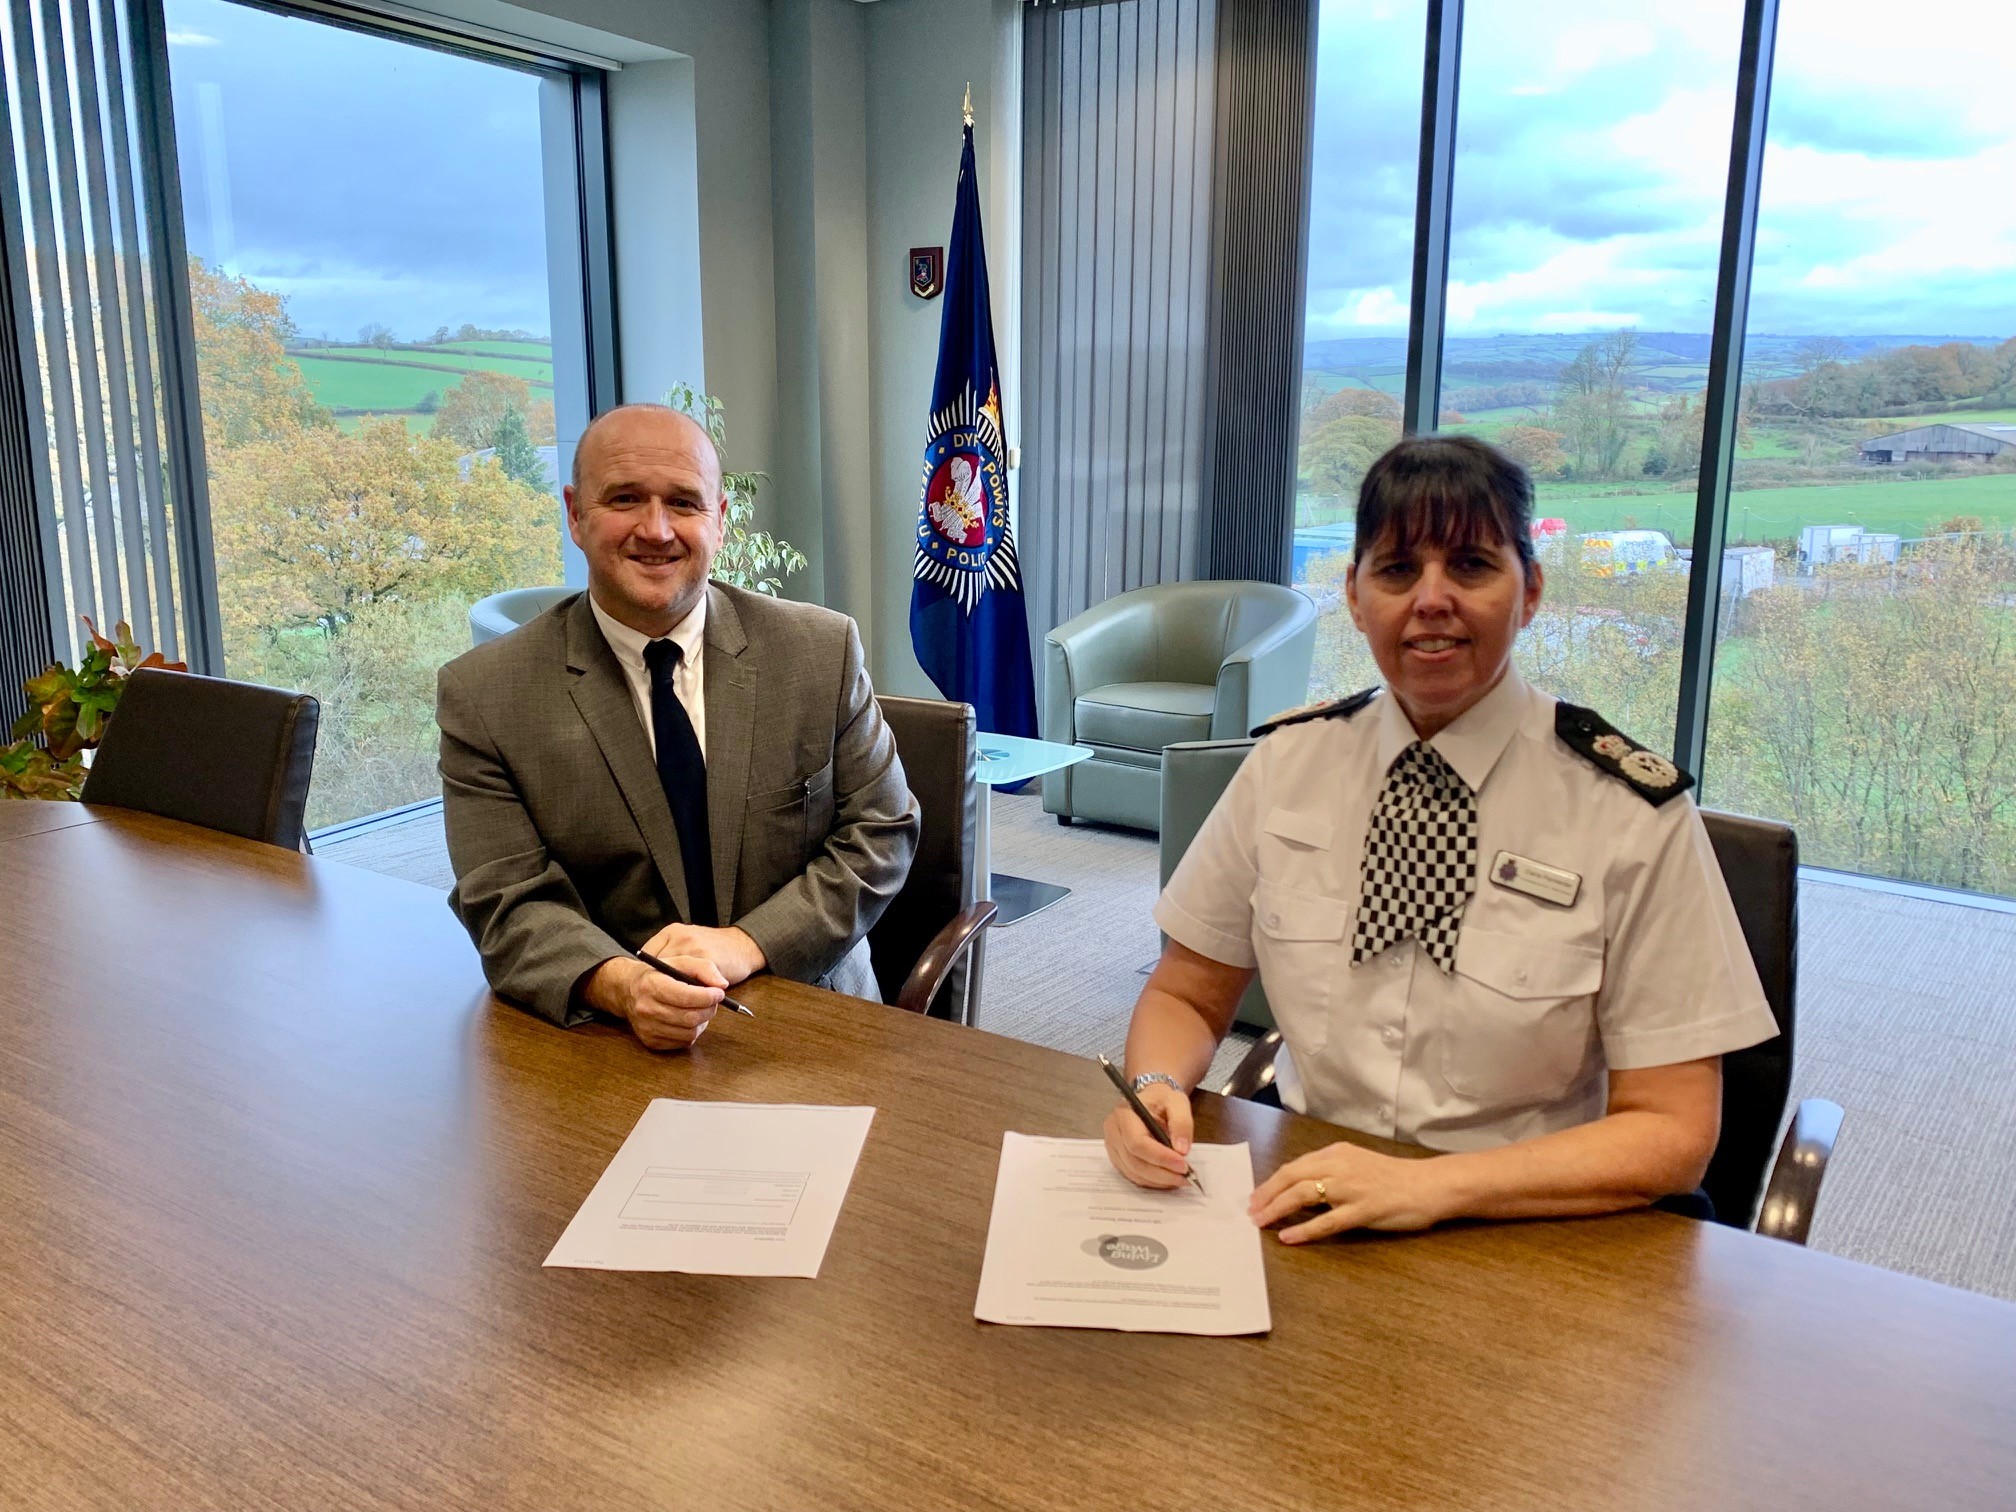 Police and Crime Commissioner Dafydd Llywelyn and Temporary Chief Constable Claire Parmenter signing the Dyfed-Powys Police commitment agreement to become a Living Wage Employer.